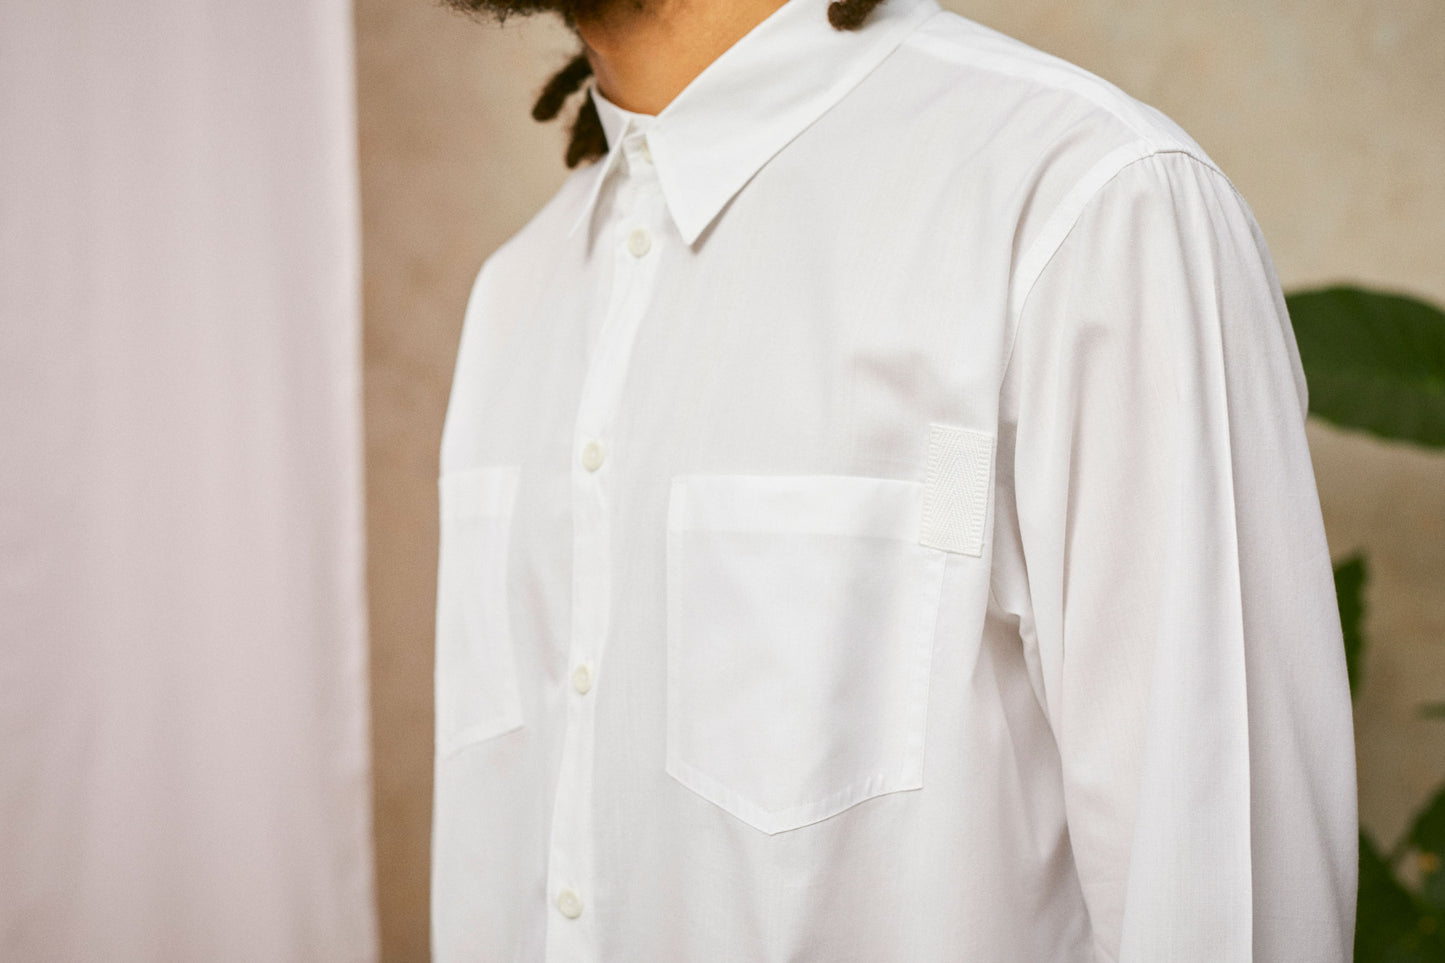 Close up of Saywood's Eddy Mens mens white Shirt showing the patch pockets with cotton herringbone tape on one corner. A drop of pink fabric can be seen in the background.